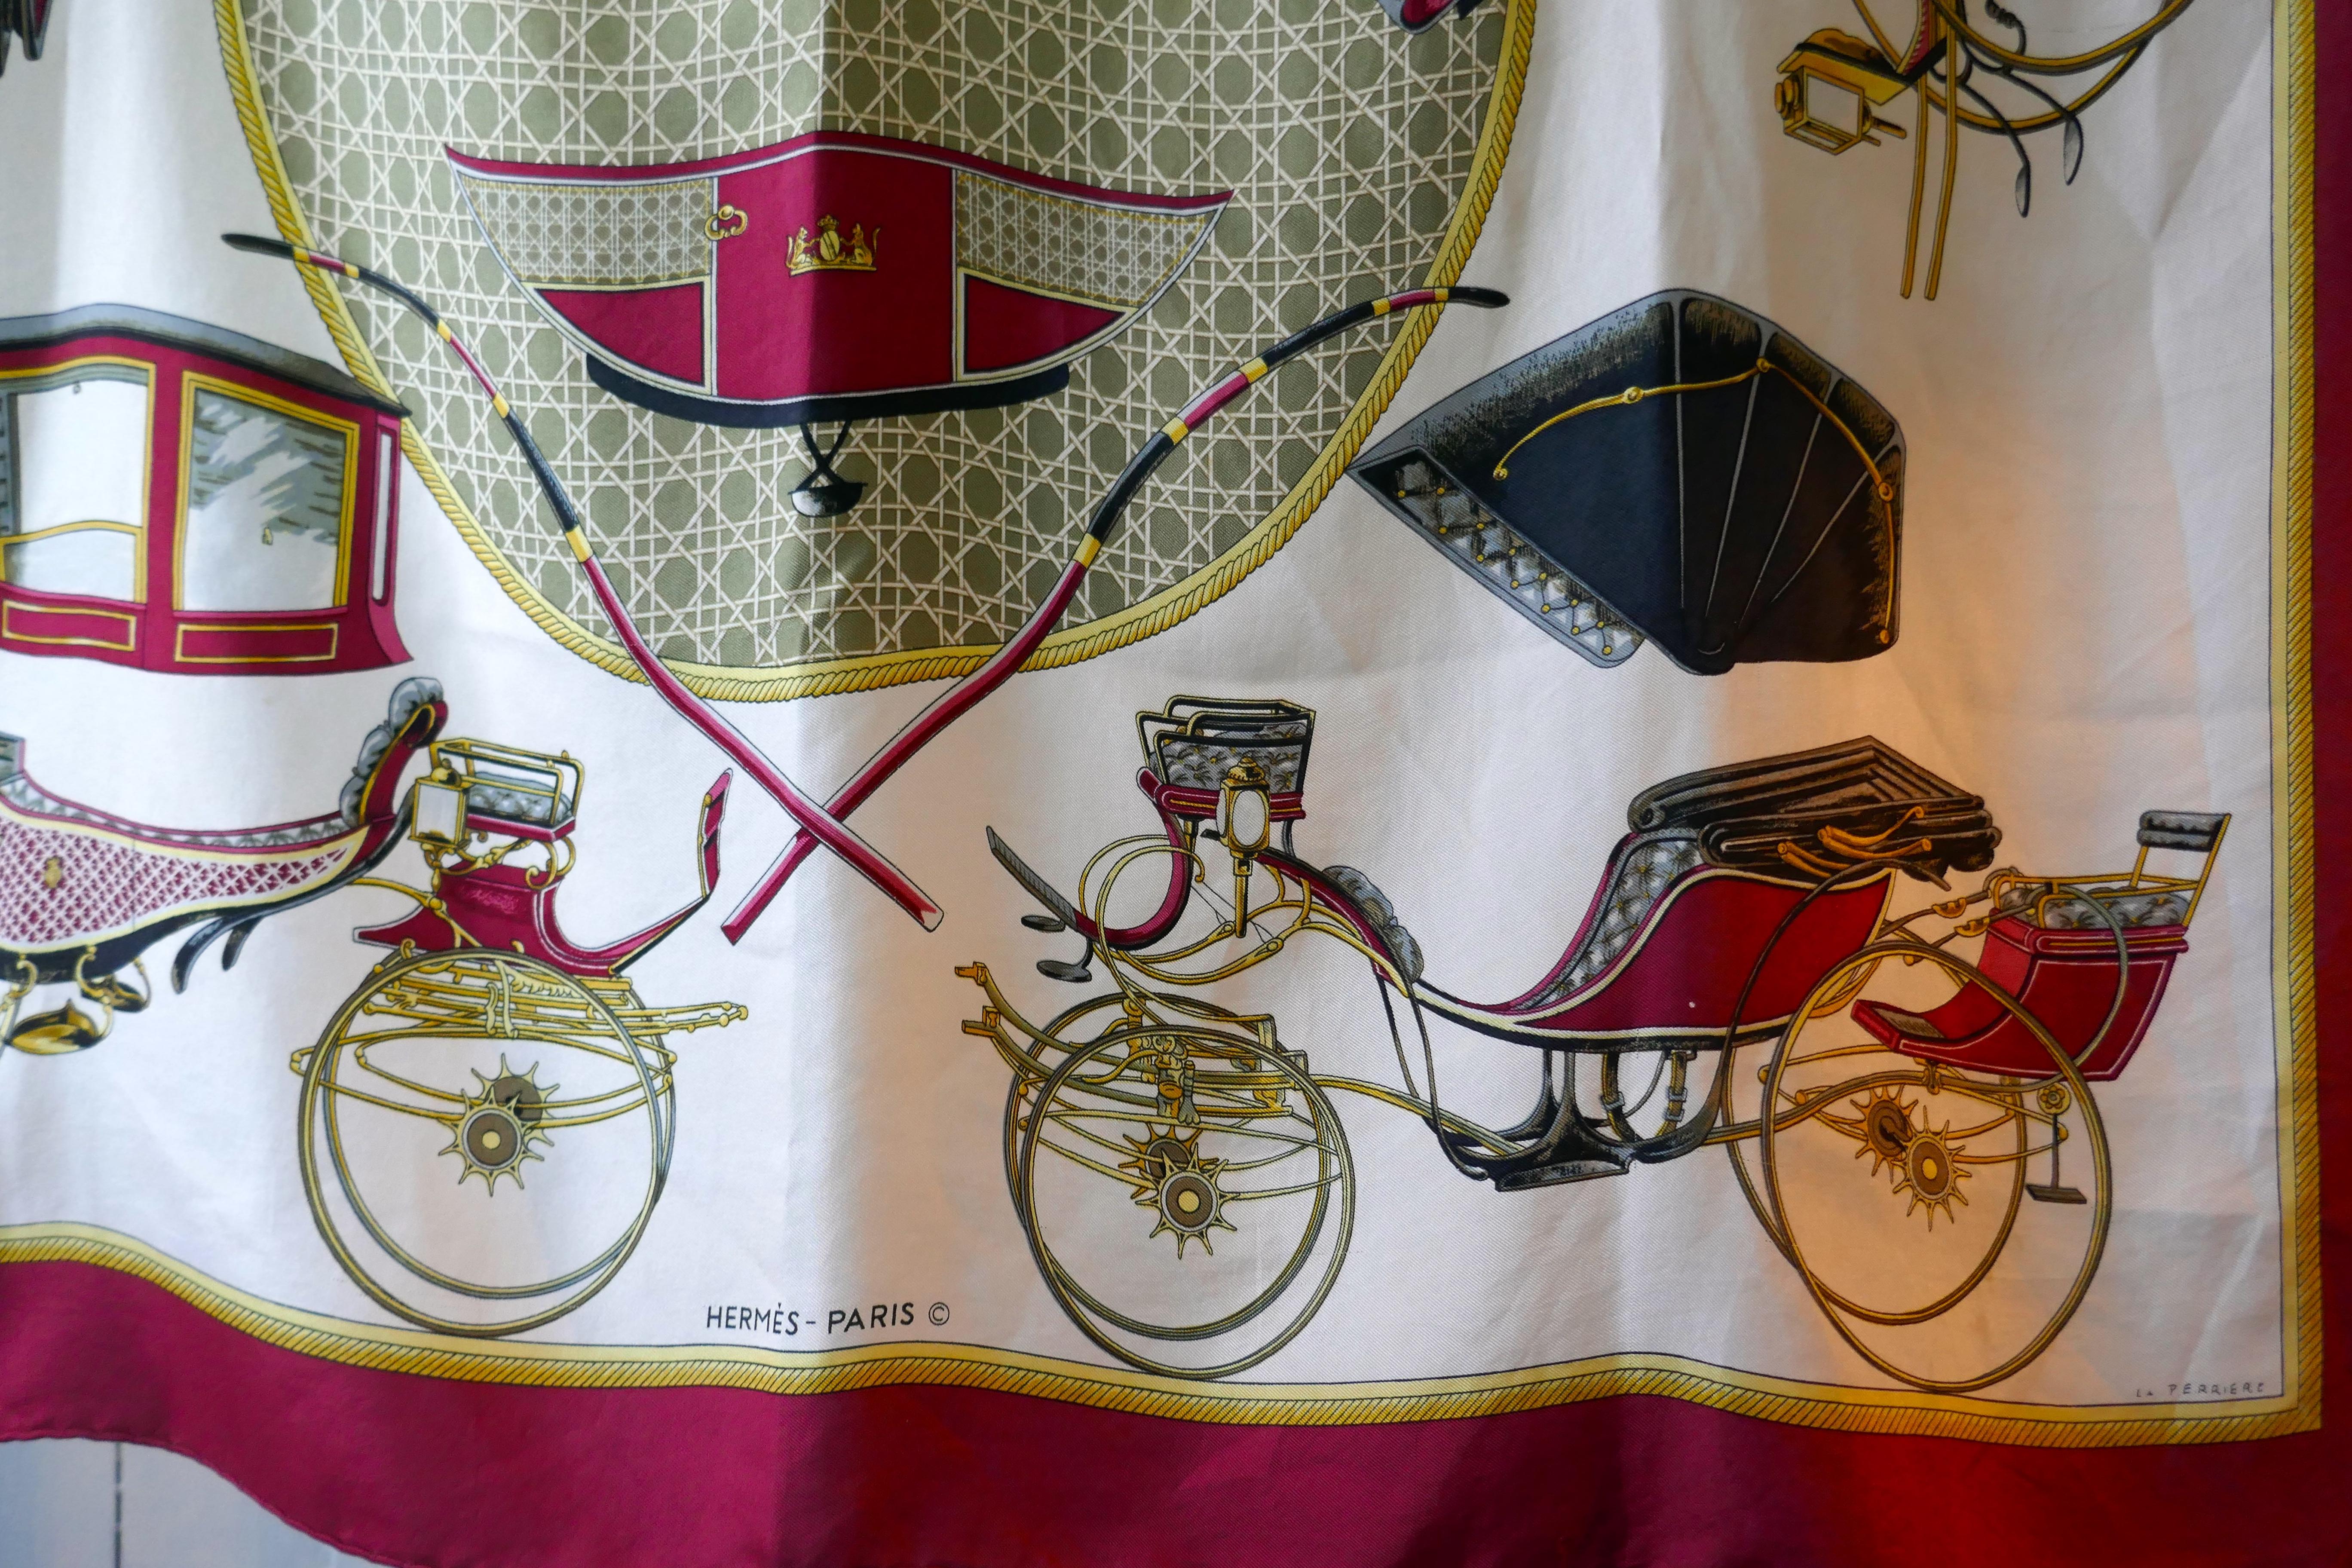 Vintage Hermes Silk Scarf “ Les Voitures a Transformation” by Francoise de la Perriere, 1965

Beautiful and rare design silk scarf from 1965, Burgundy Border, one for the collector
Preowned/vintage with some signs of wear:  a slight pull on the